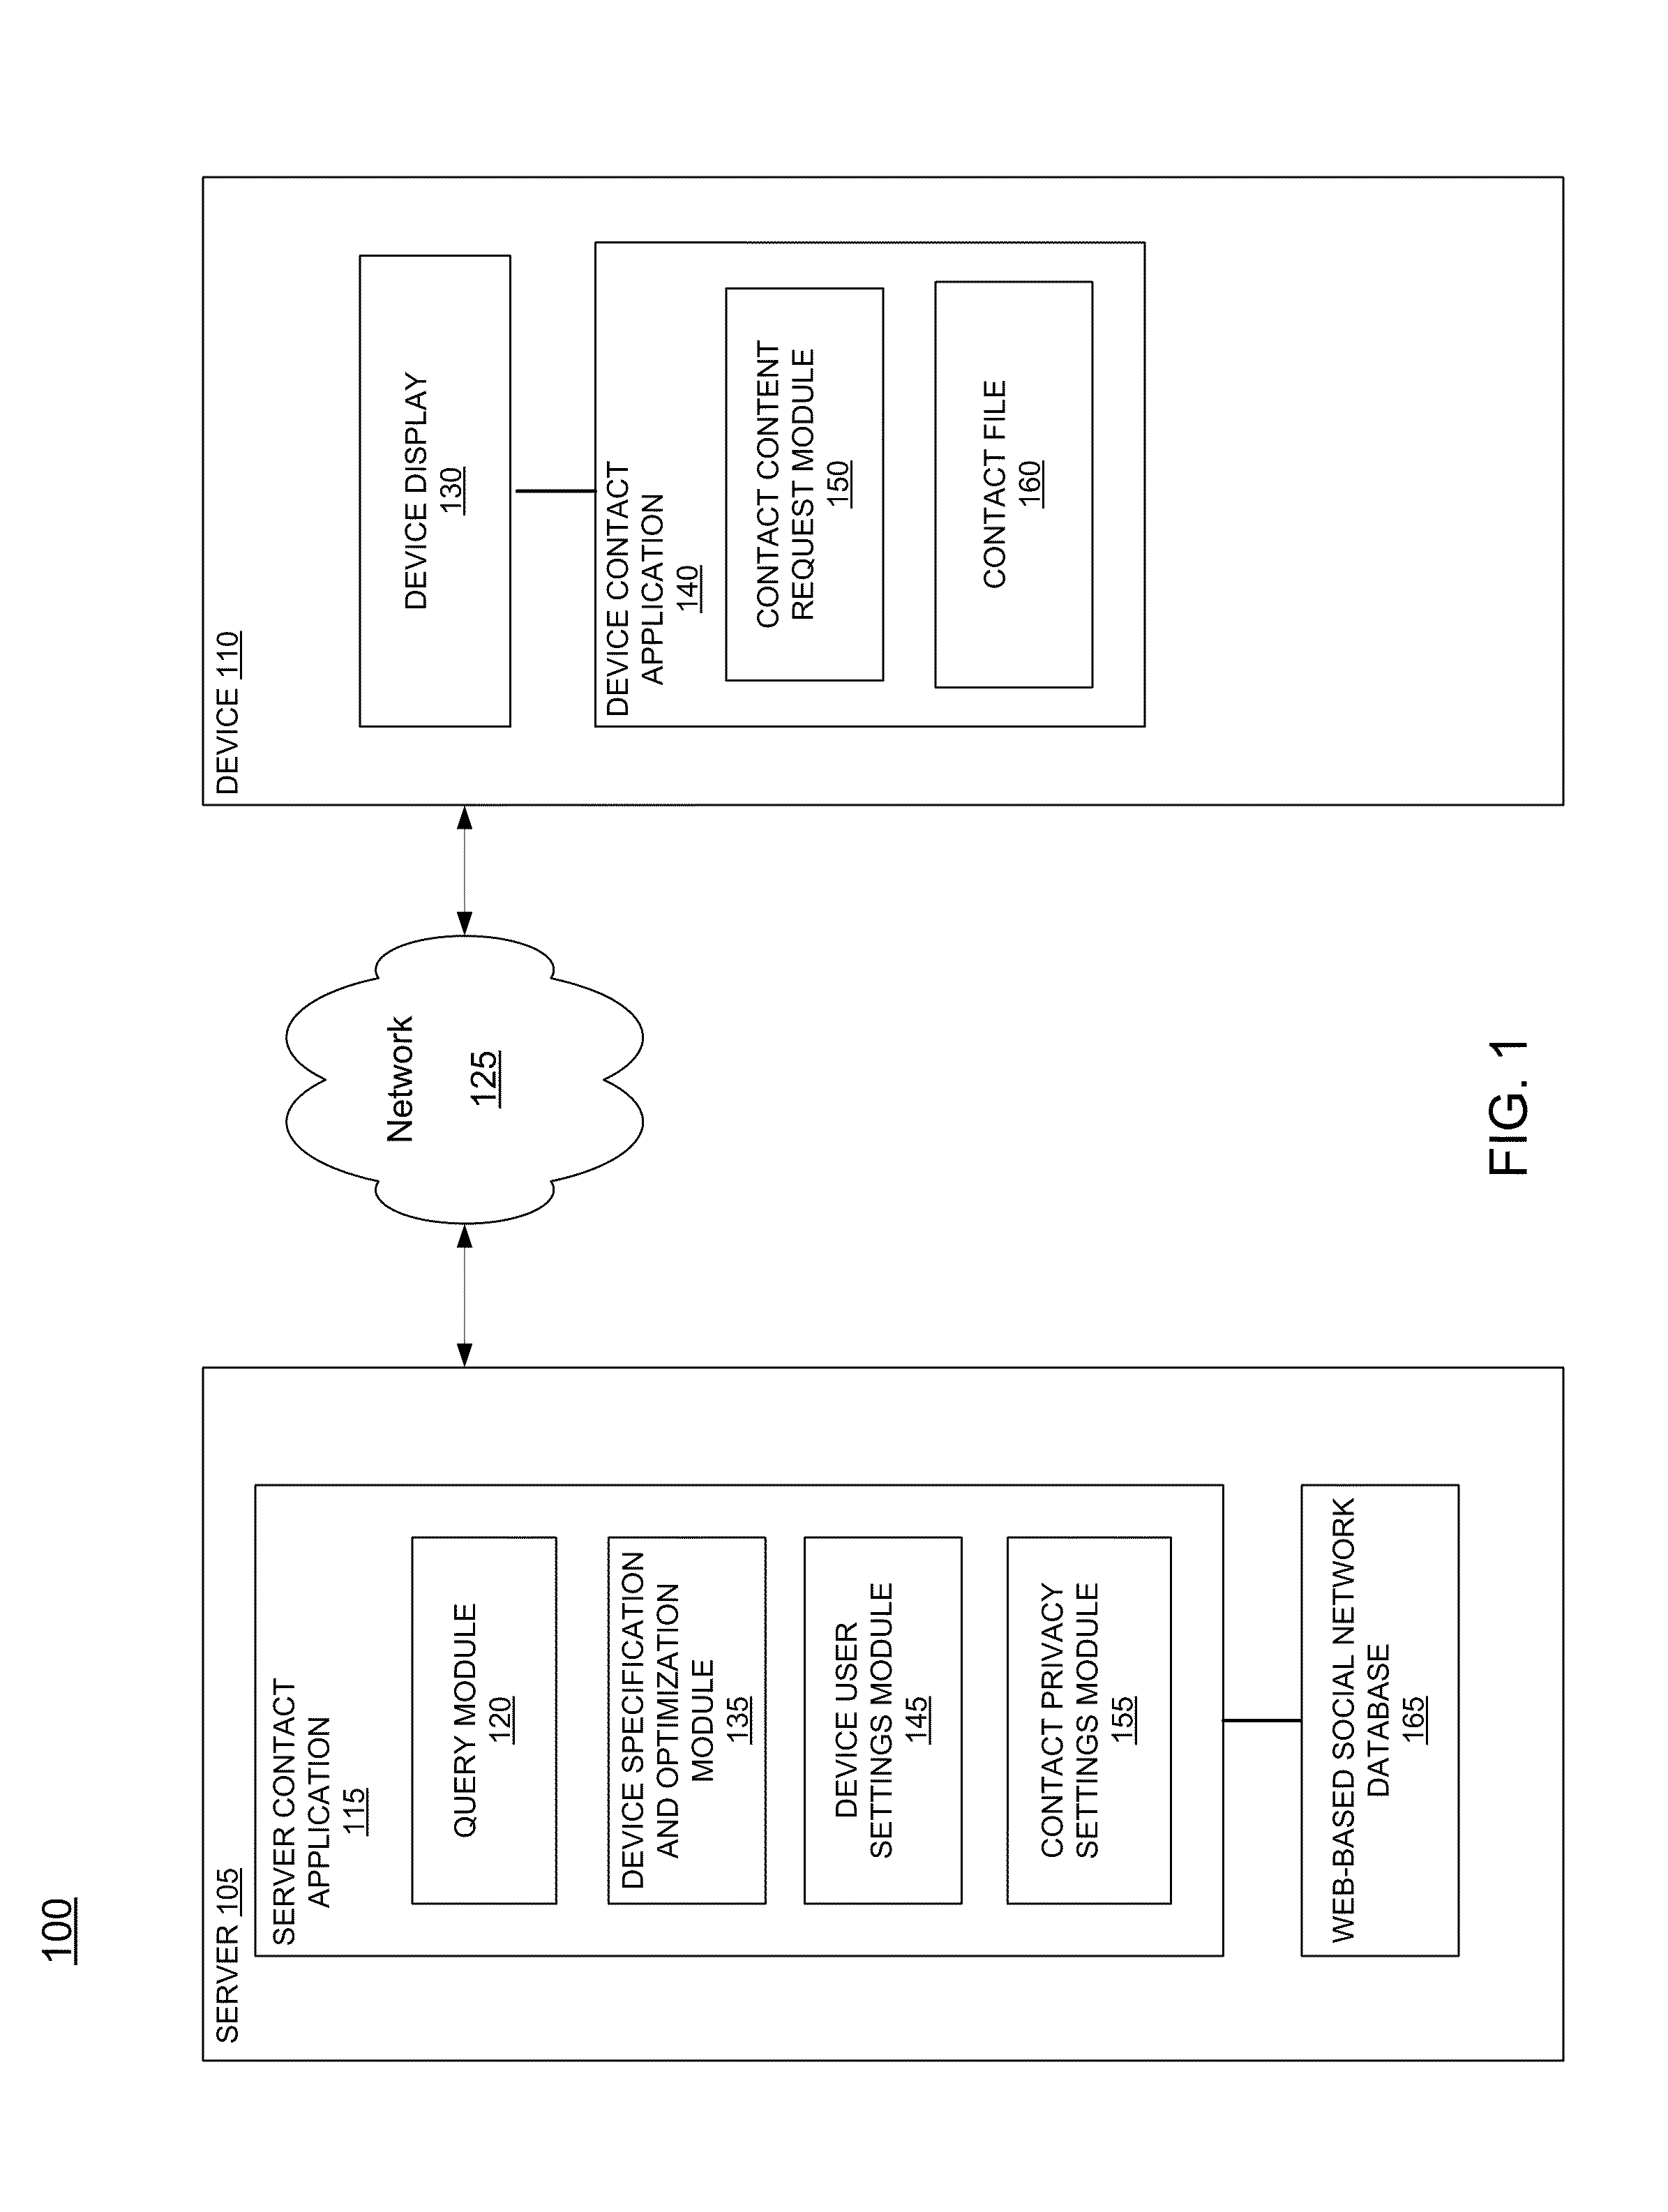 Automatic Population of a Contact File With Contact Content and Expression Content